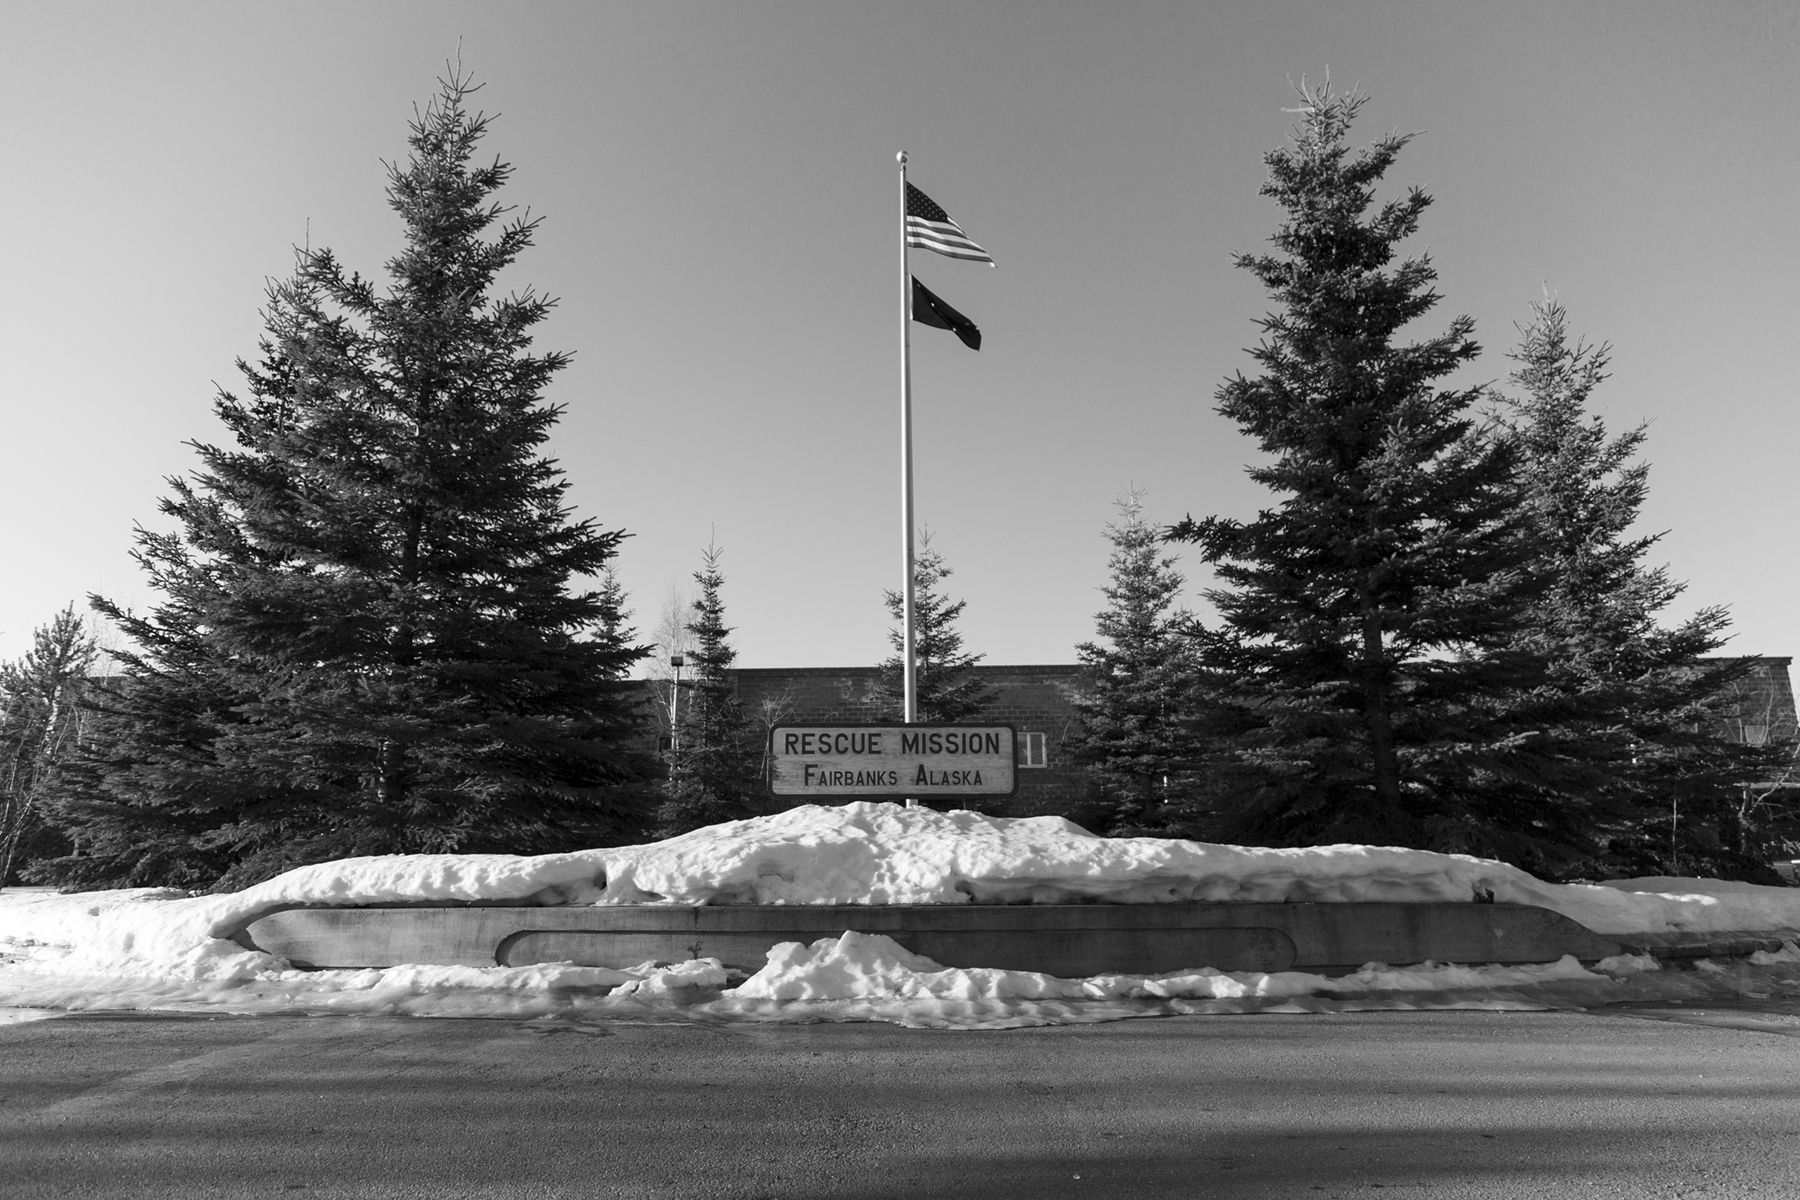 A strong wind blows both the Alaska state flag and American flag on April 18th, 2018 in Fairbanks, AK in front of the Rescue Mission. Courtesy of the artist